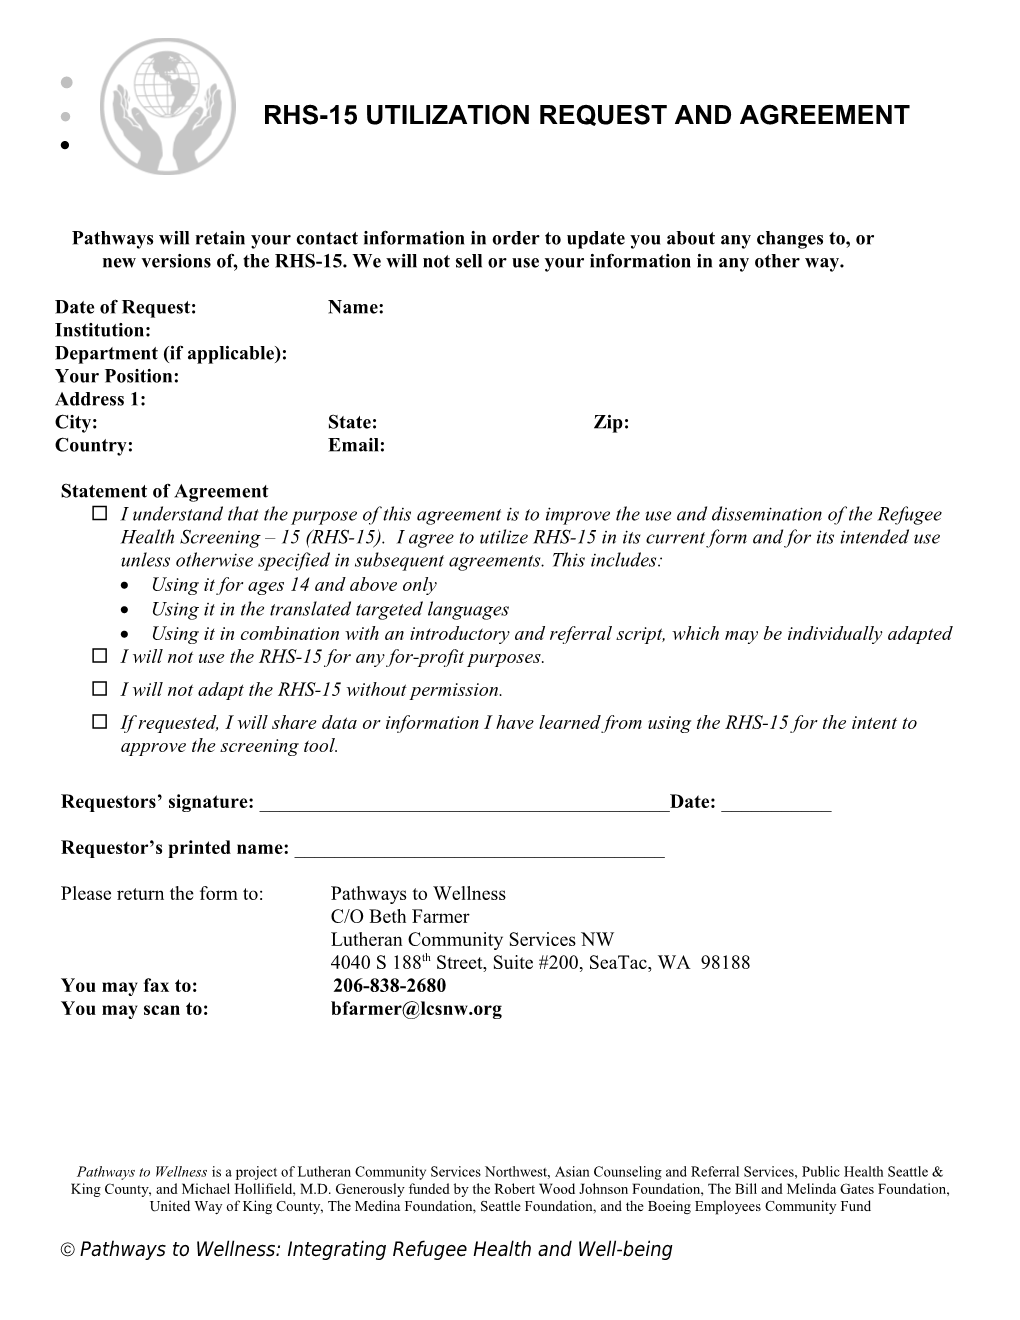 RHS-15 Utilization Request and Agreement